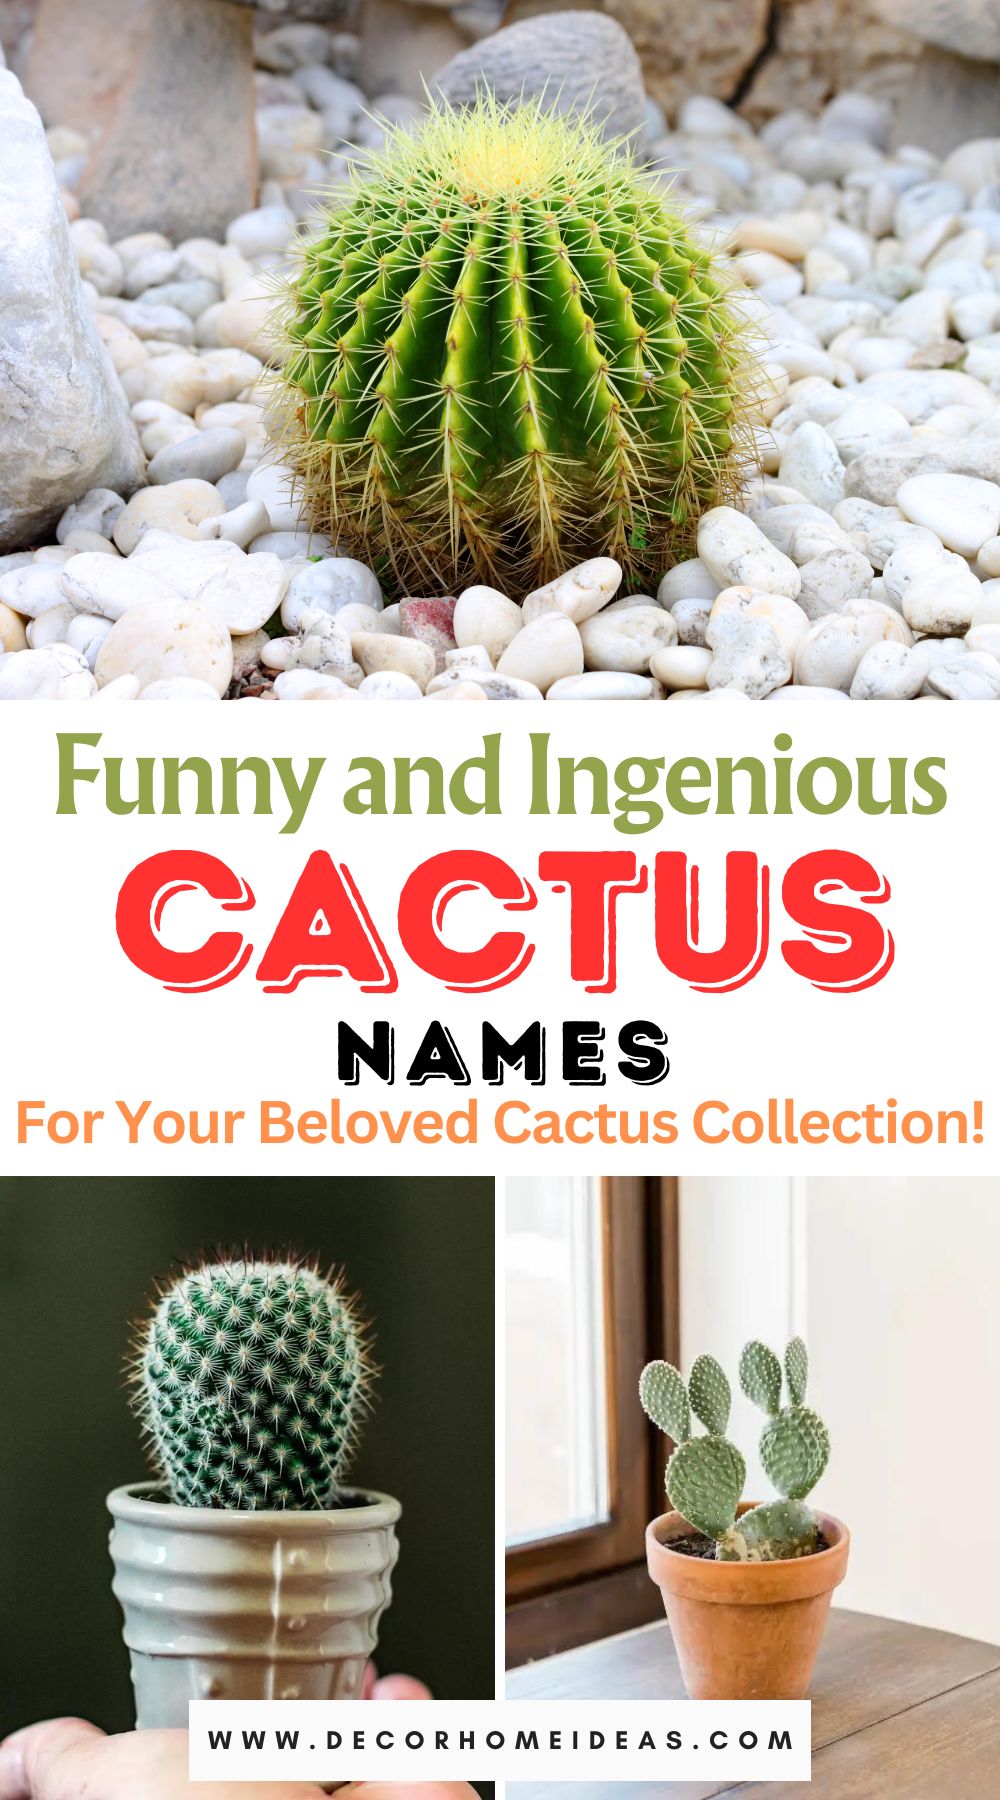 Get ready to add humor and personality to your cacti collection with our selection of funny and ingenious names for your prickly pals! Explore creative naming ideas that will bring a smile to your face every time you tend to your cacti garden.